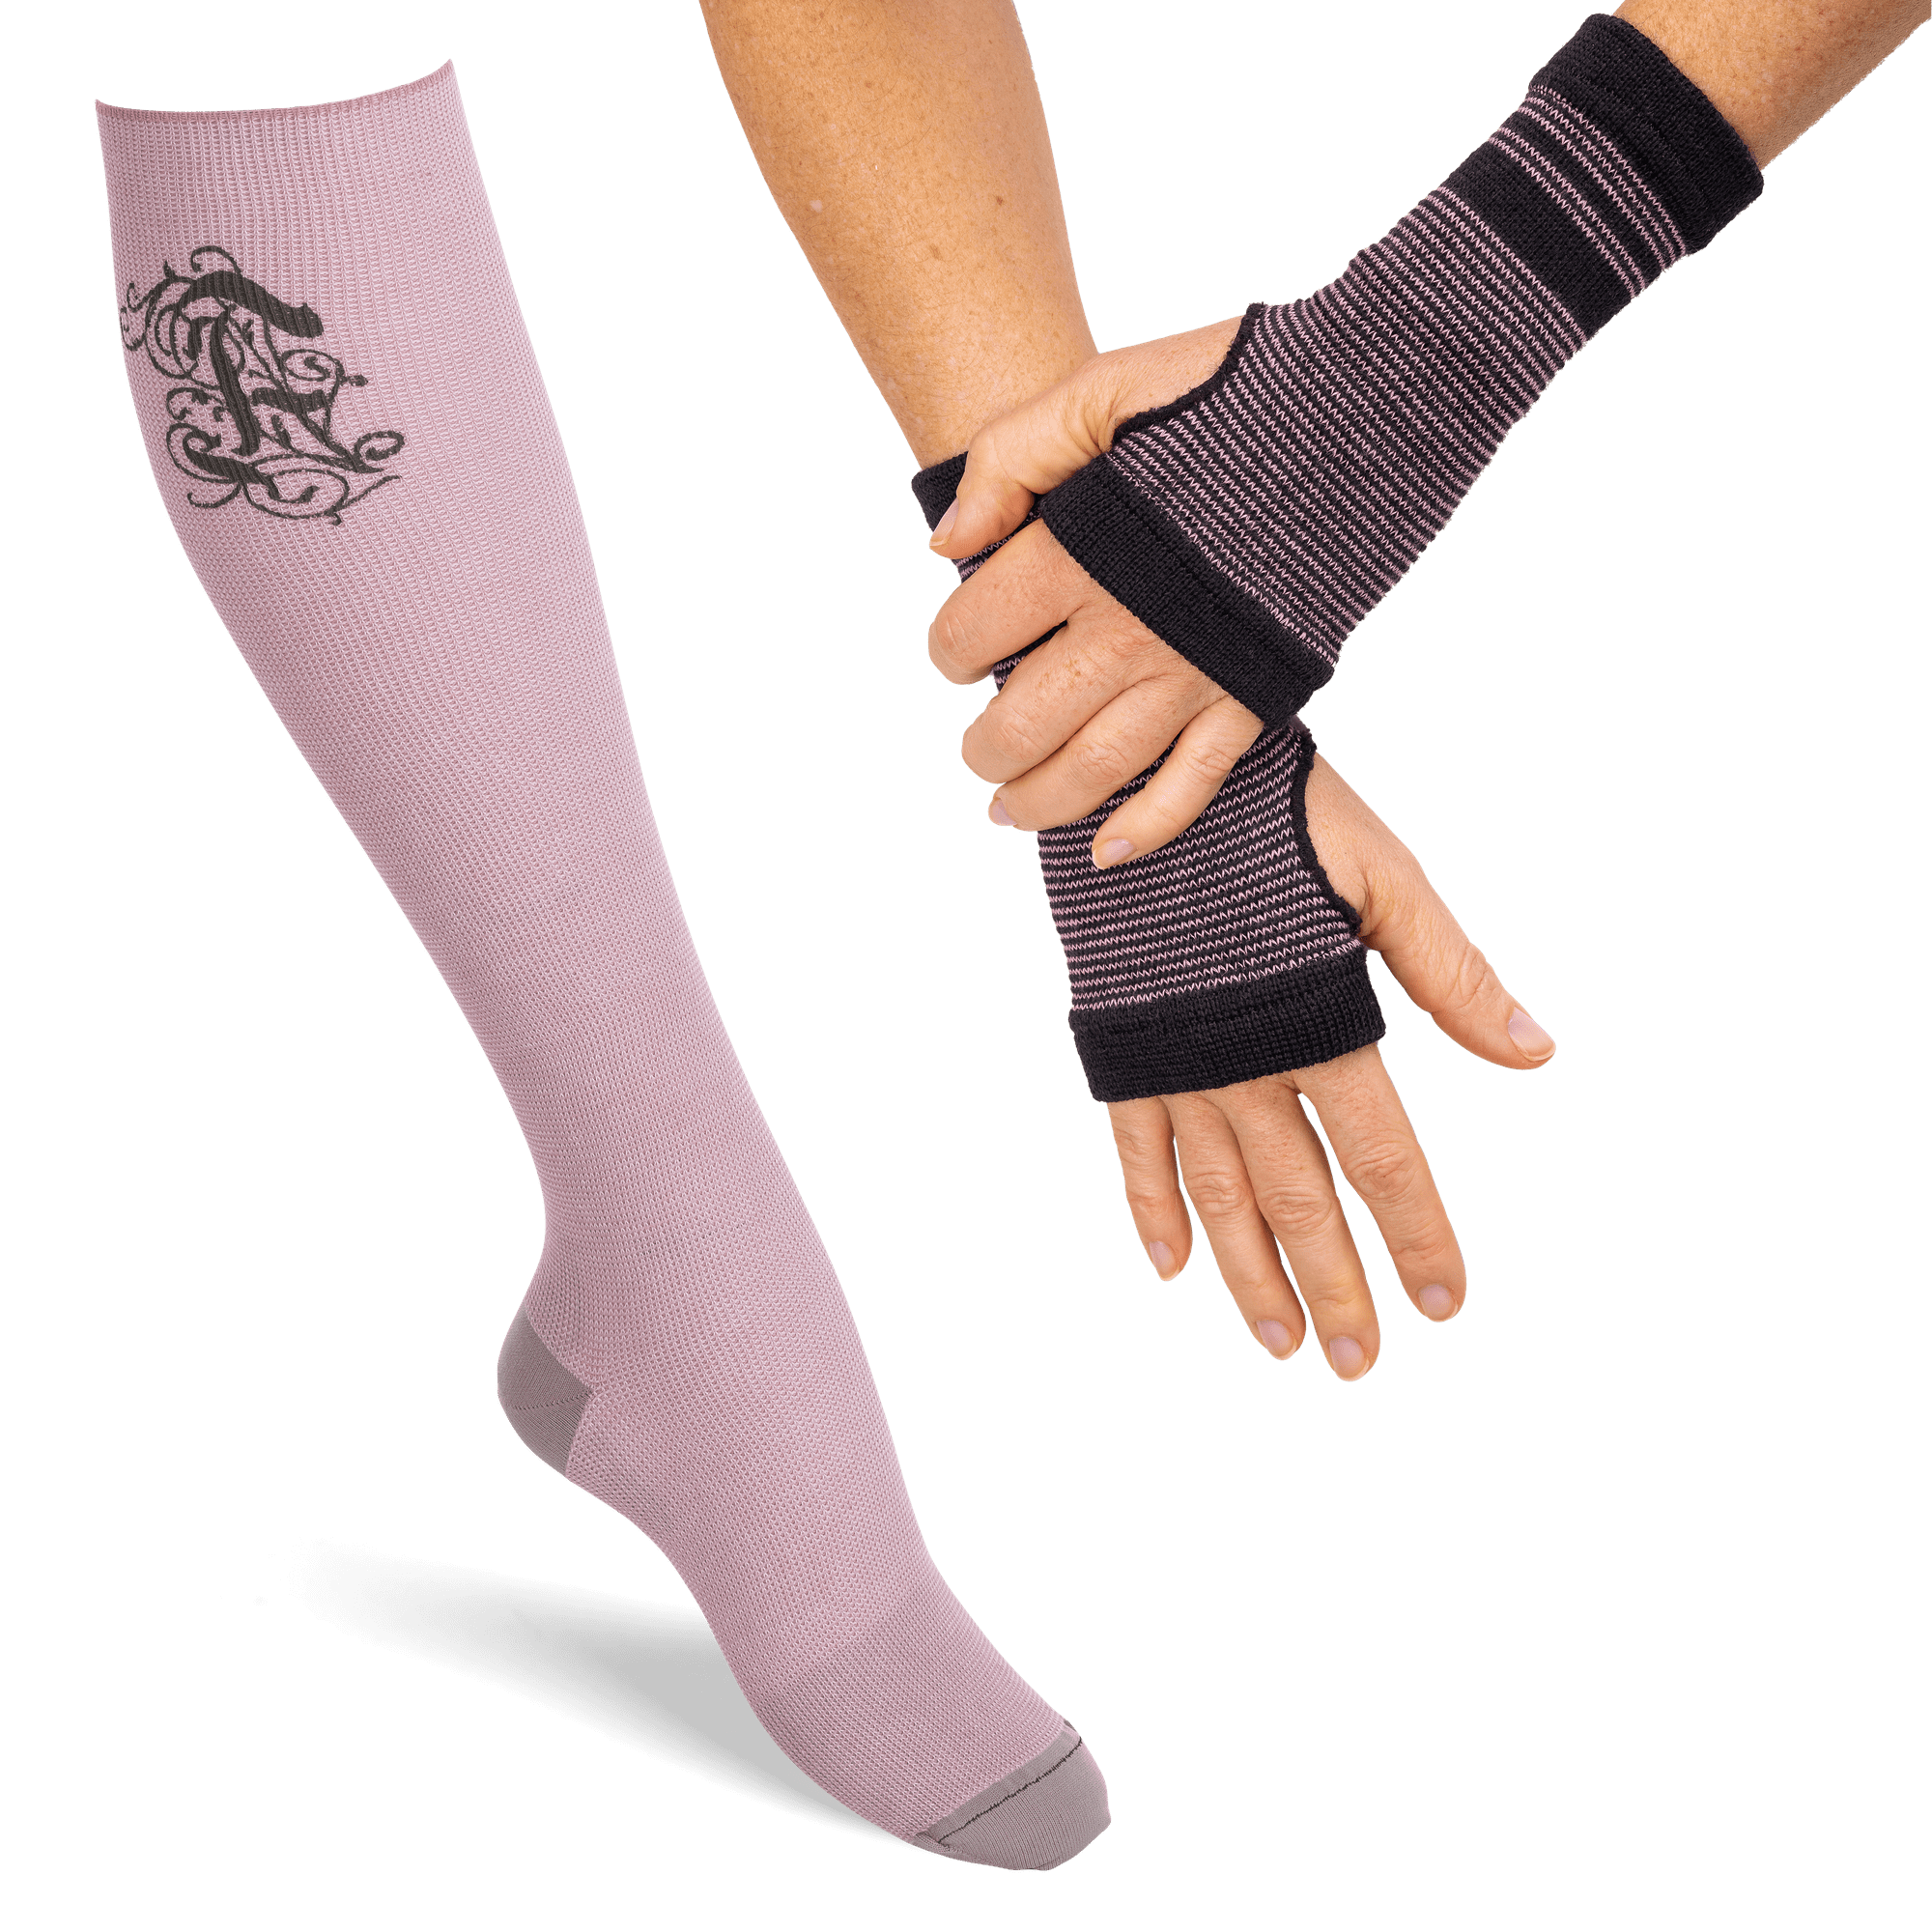 1-PACK SUPPORT SOCKS & HAND WARMERS POWDERY PINK